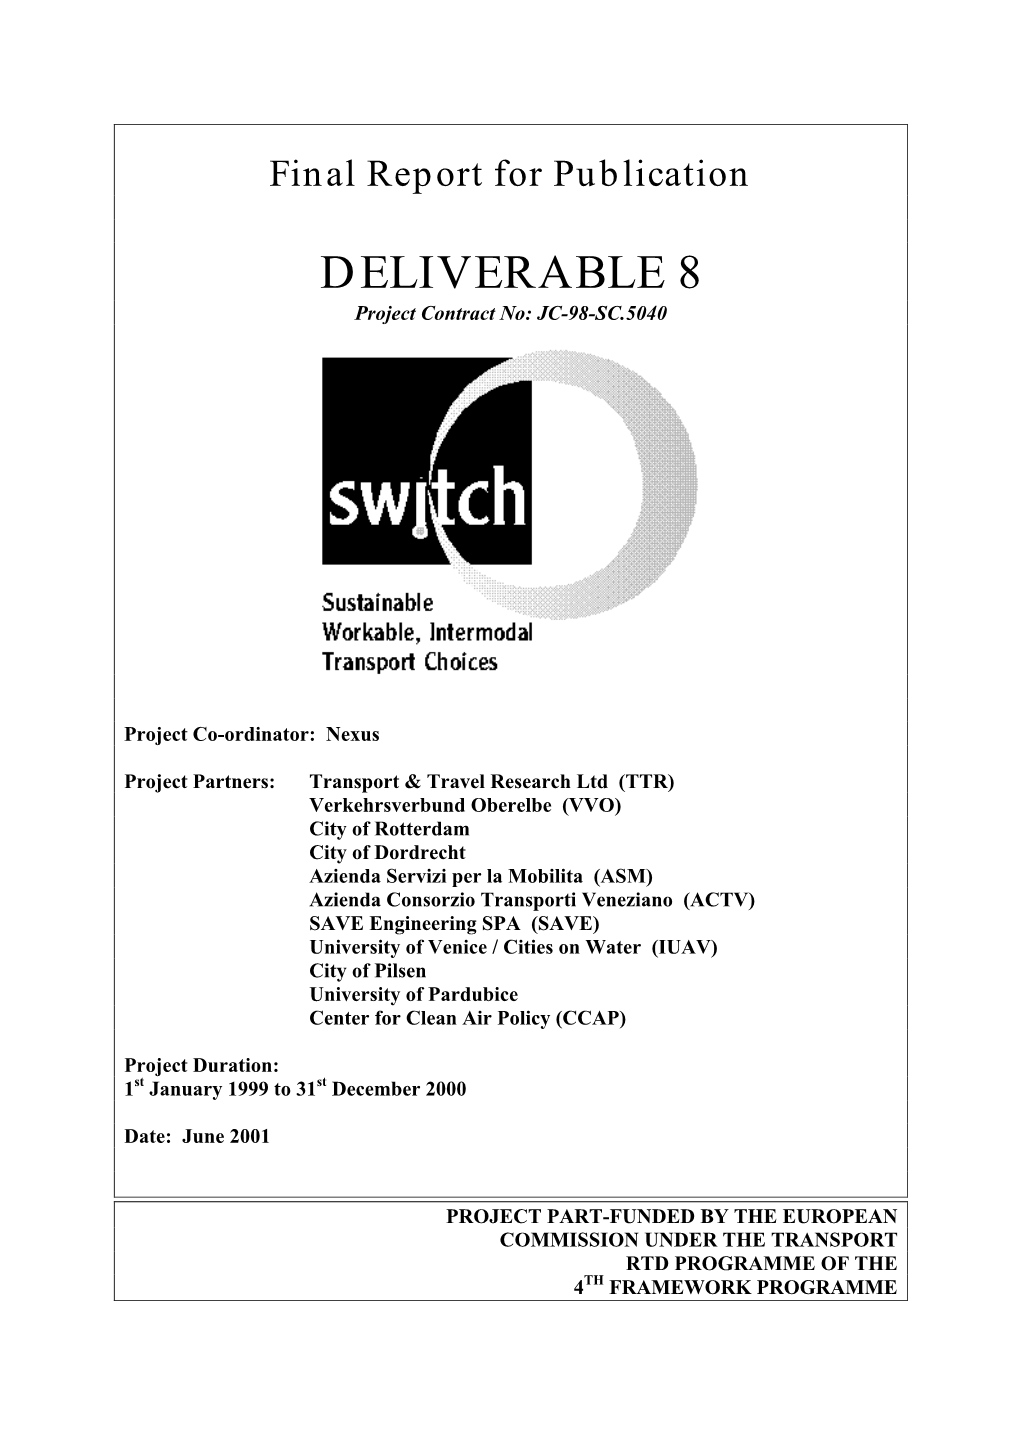 SWITCH Final Report for Publication June 2001